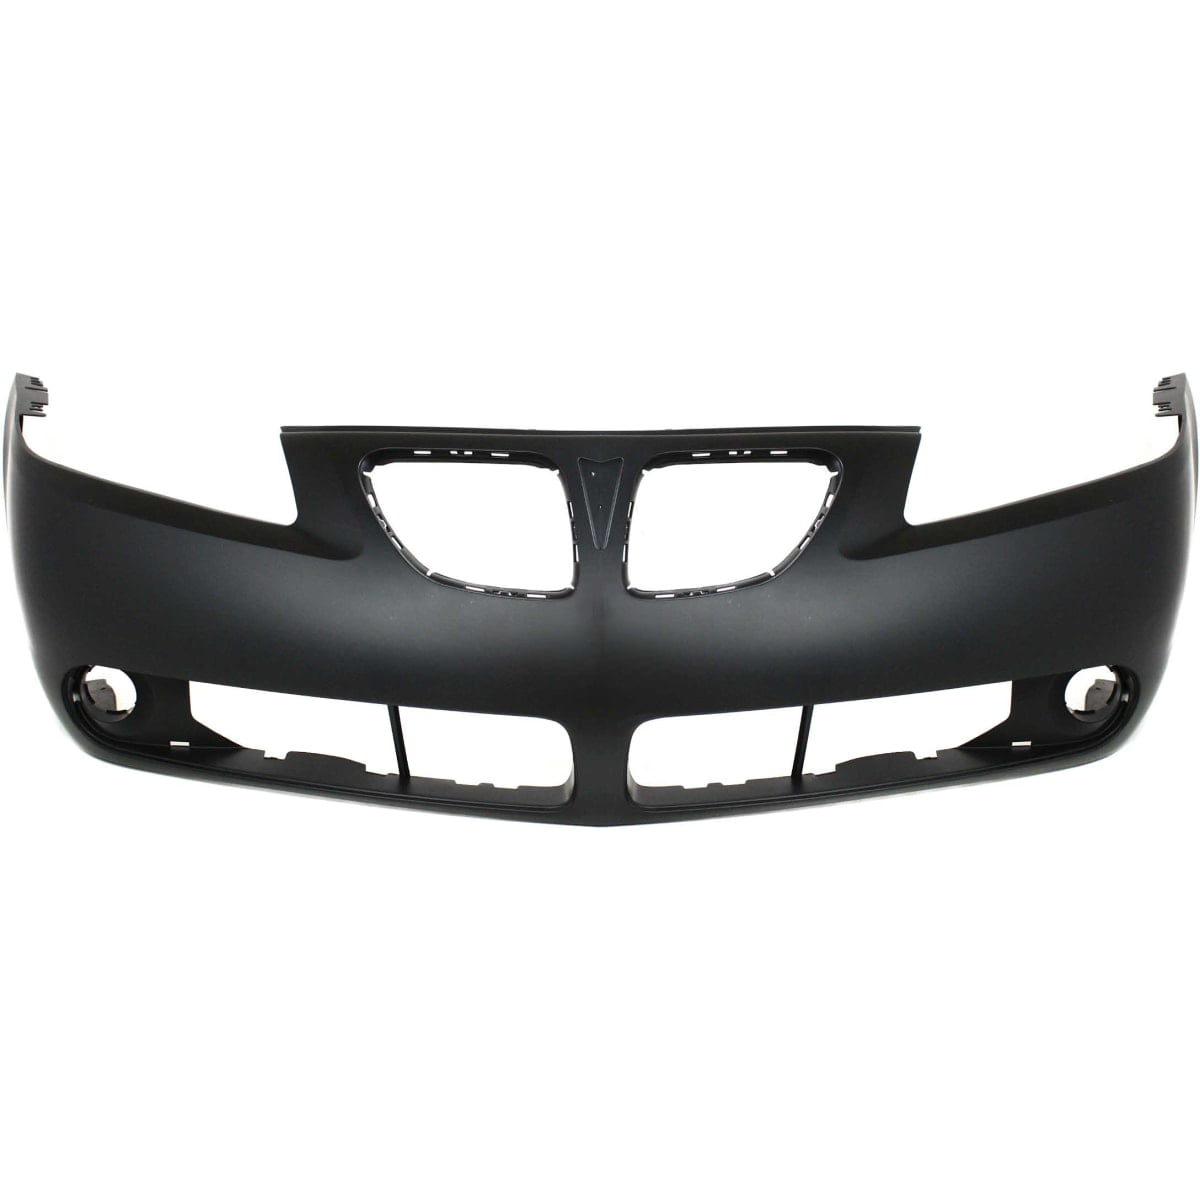 Partslink Number GM1000731 OE Replacement Pontiac G6 Front Bumper Cover 